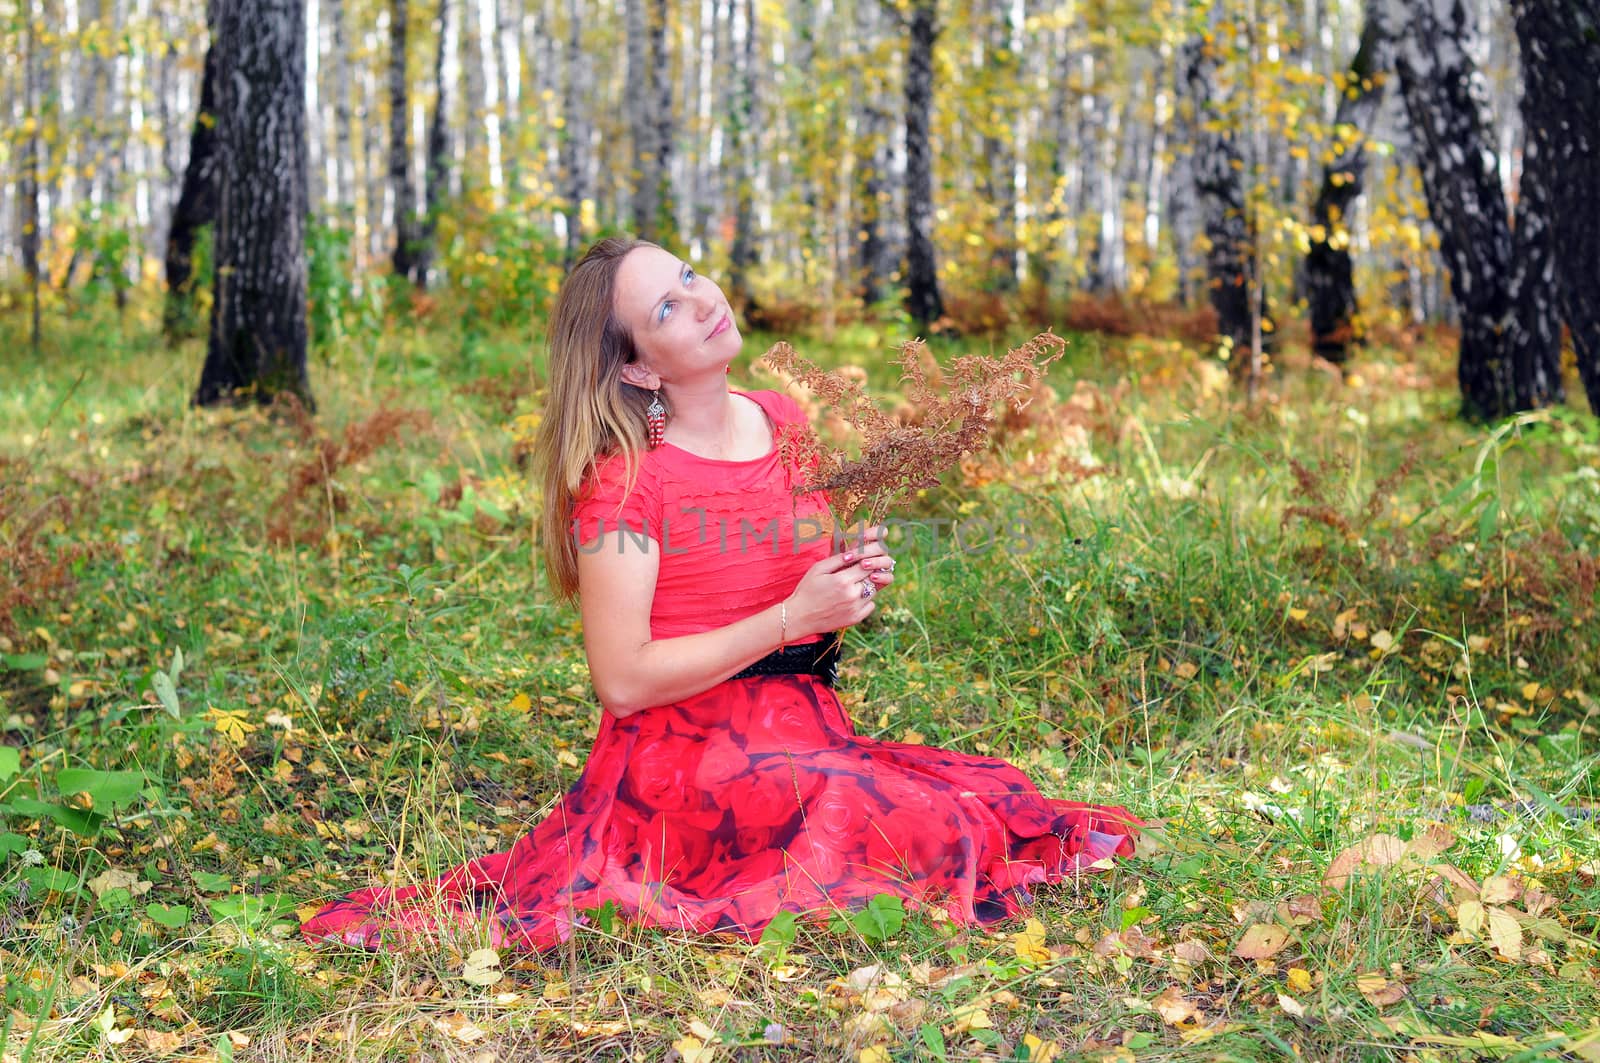 the beautiful woman in red clothes in the autumn wood.